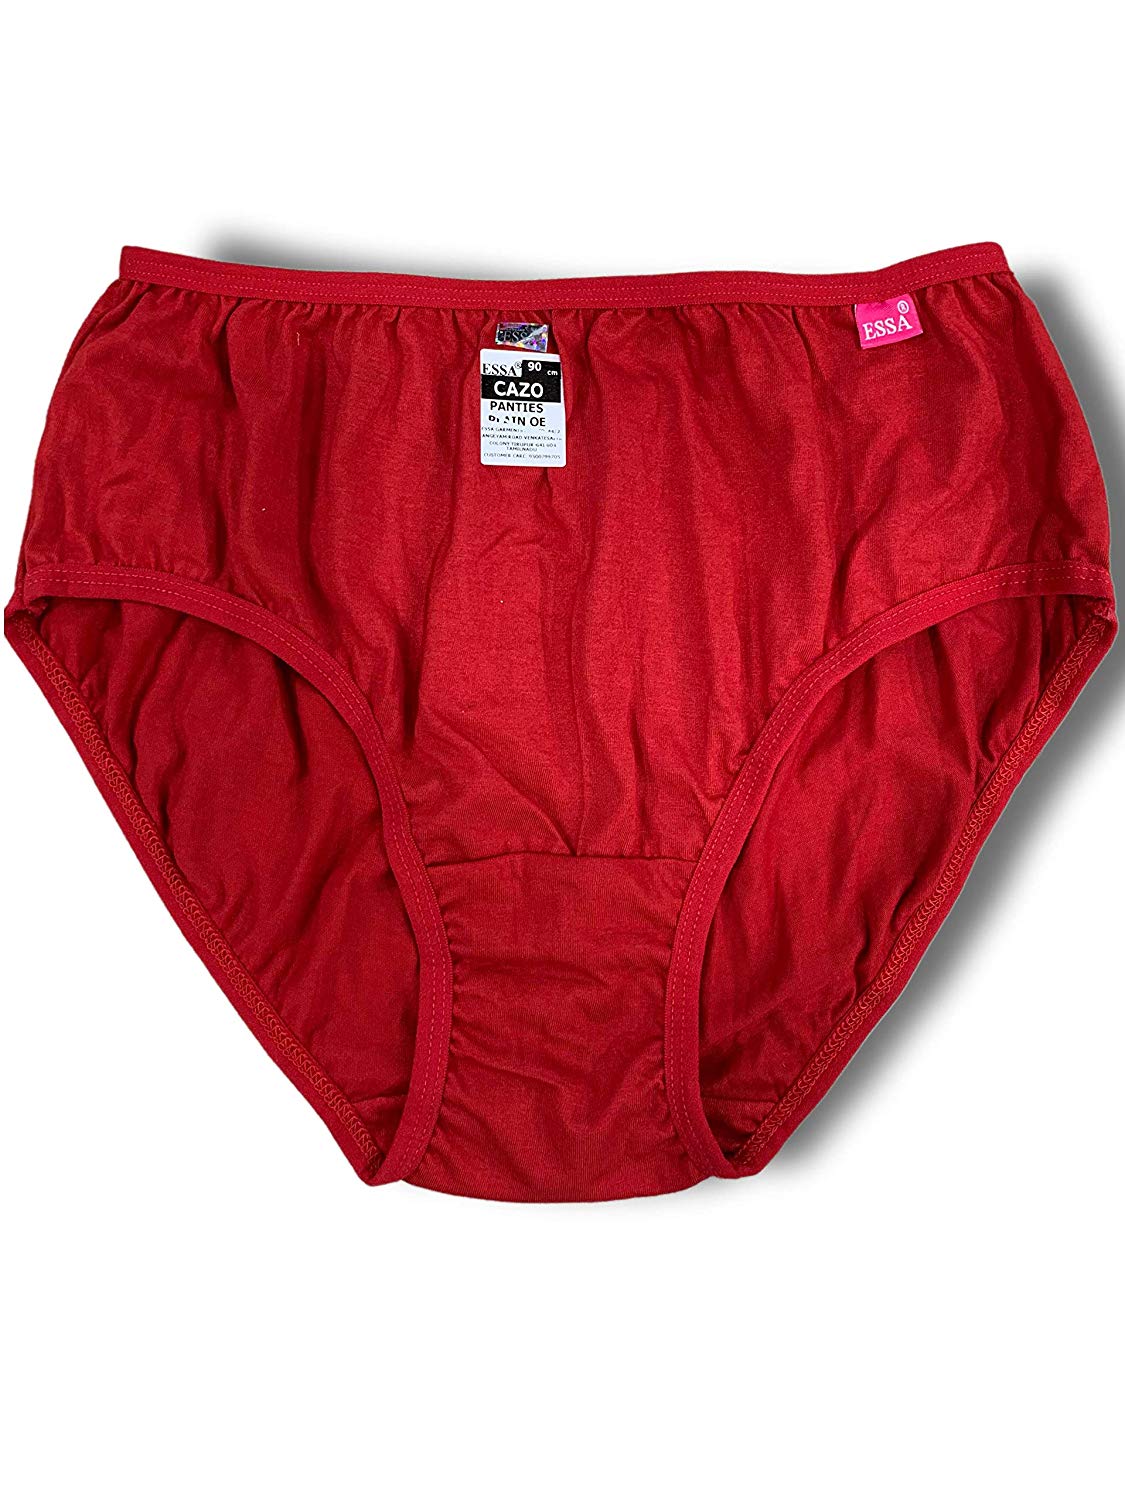 ESSA Panty For Girls Price in India - Buy ESSA Panty For Girls